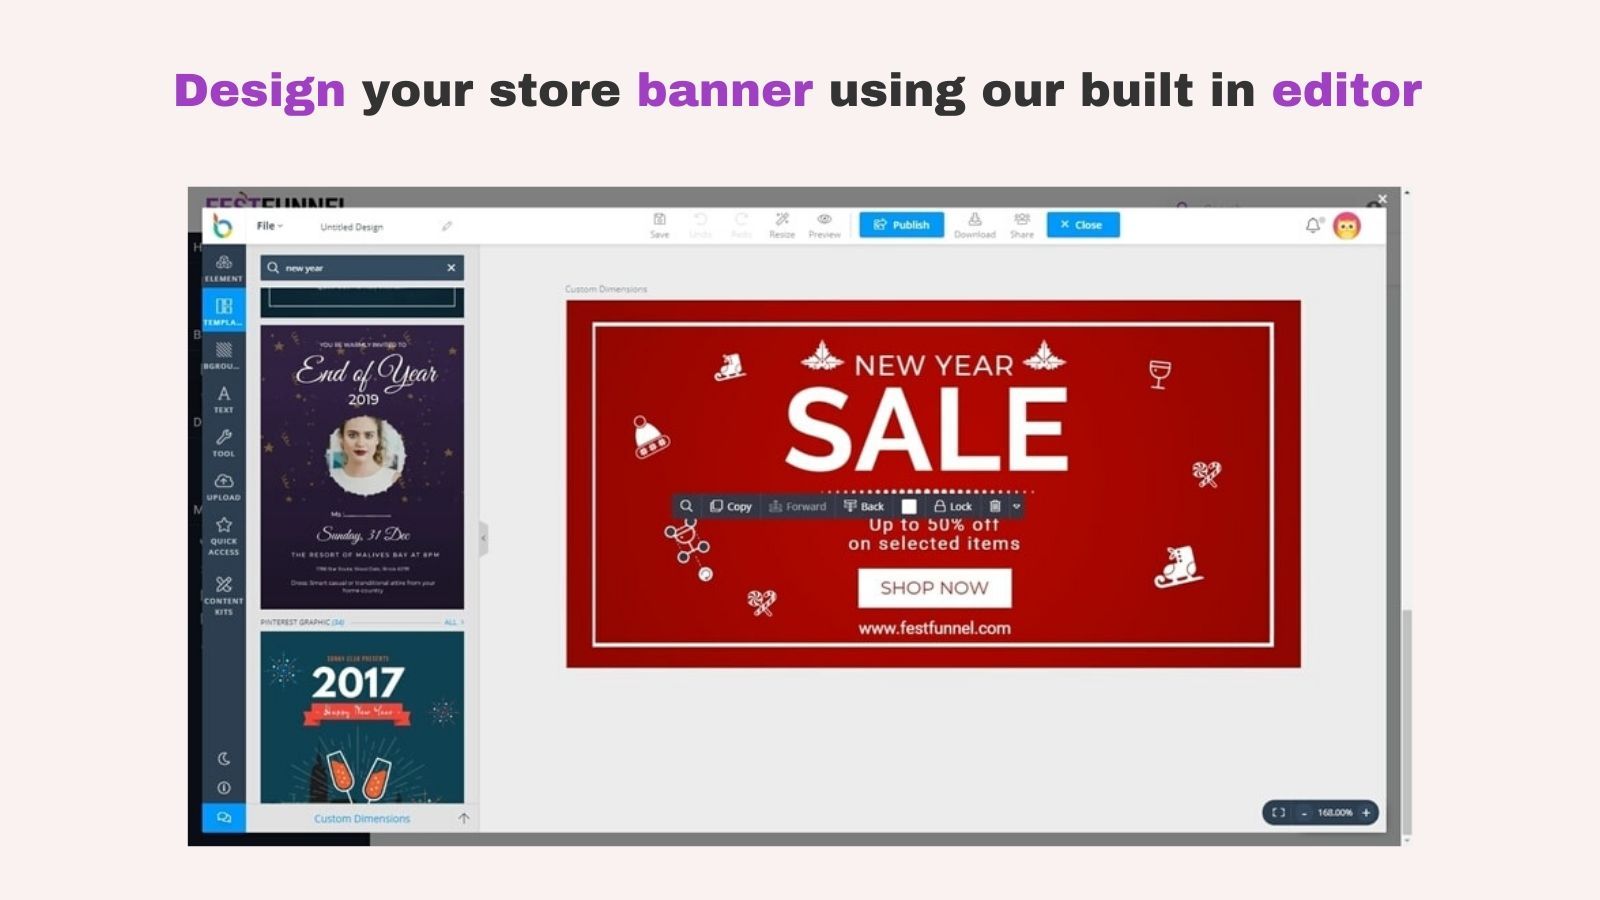 Design your store banner using our built in editor